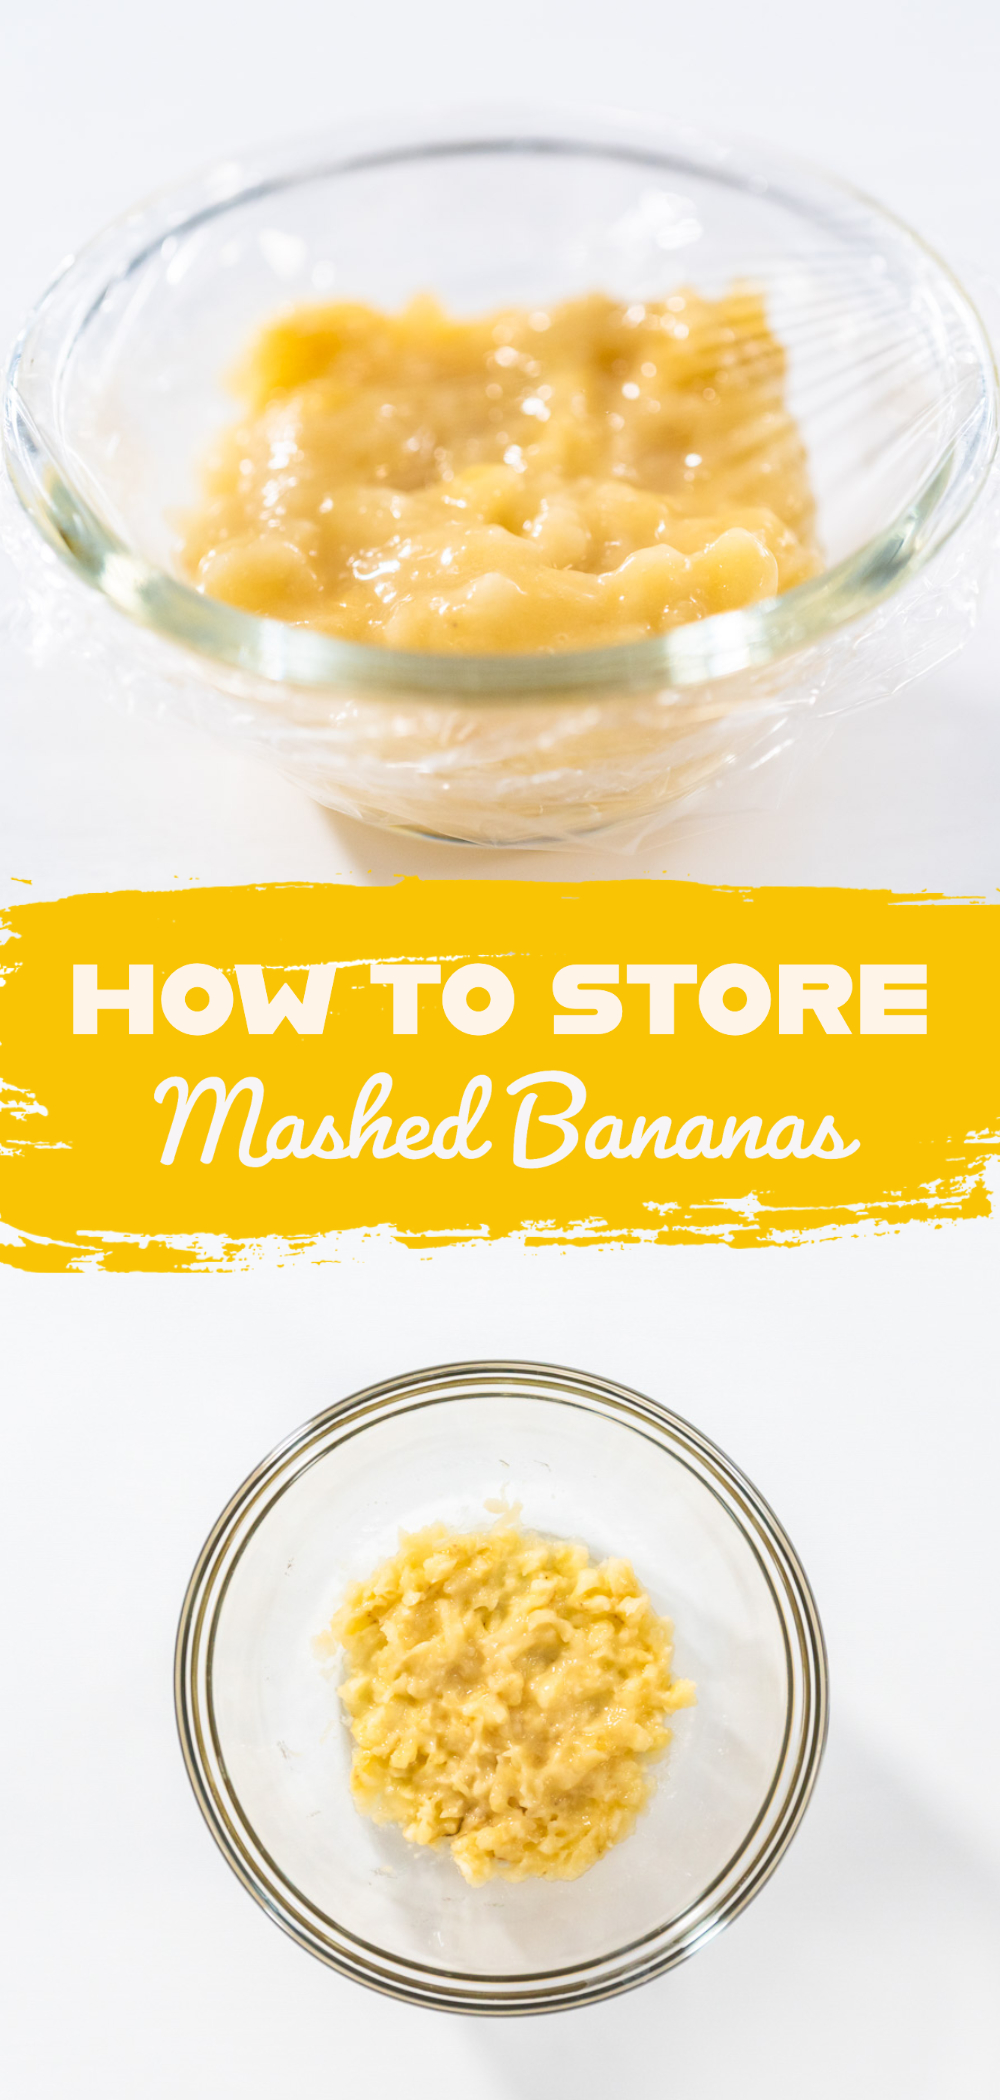 How to Store Mashed Bananas